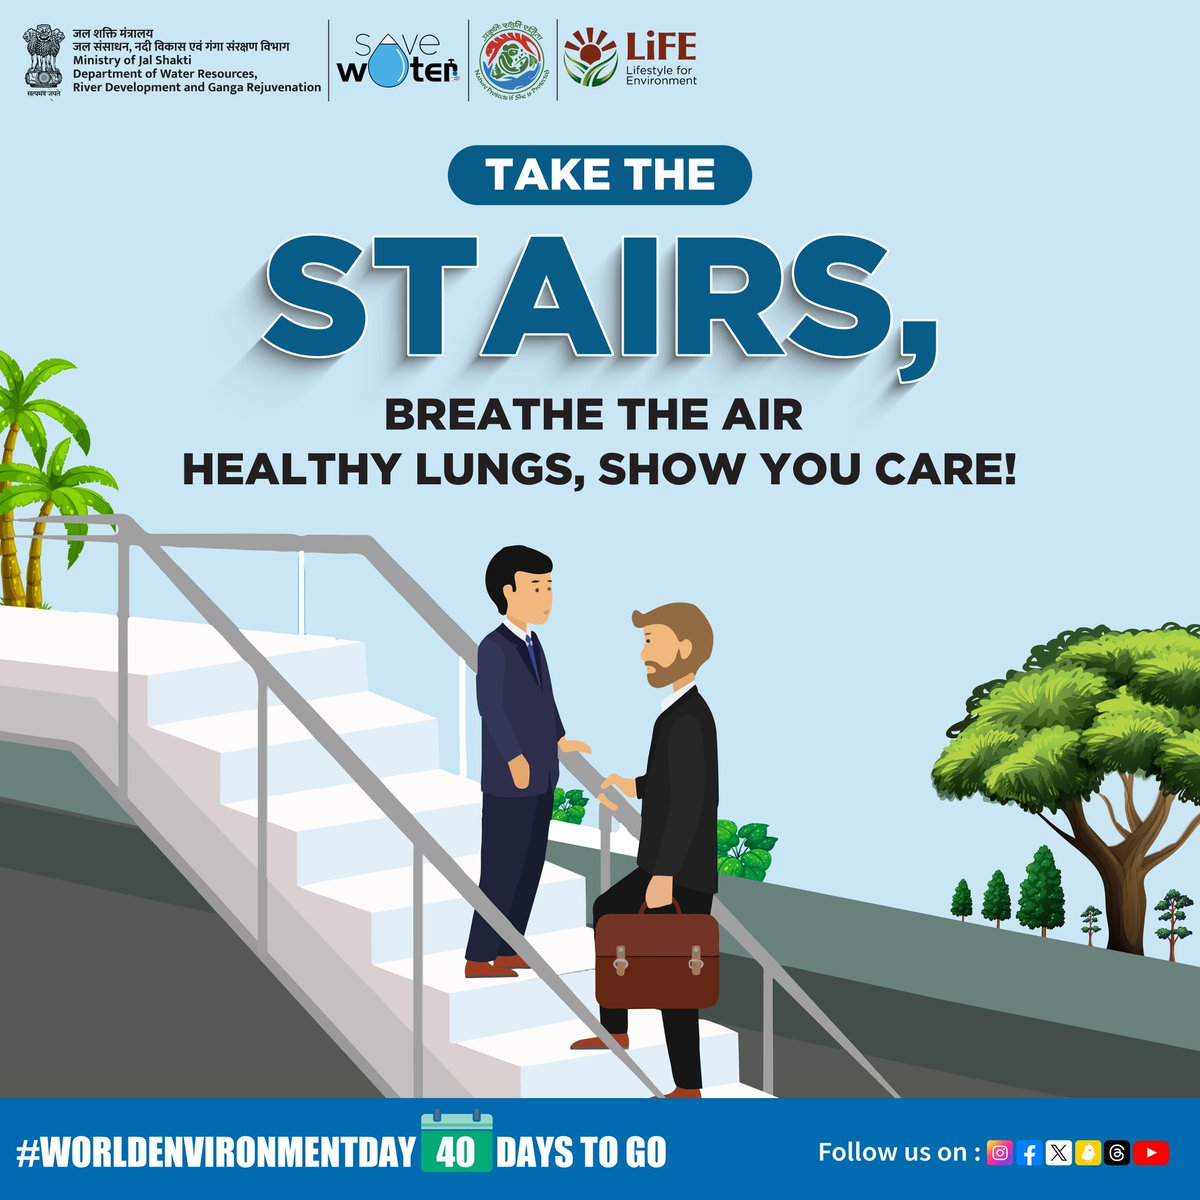 Ditch elevator & take the stairs today! It's a quick #fitness boost that strengthens your heart & muscles. Every step counts towards a healthier you & a greener planet! Join #MissionLiFE for simple ways to live #sustainable life. #TakeTheStairs #ClimateAction #ProPlanetPeaople